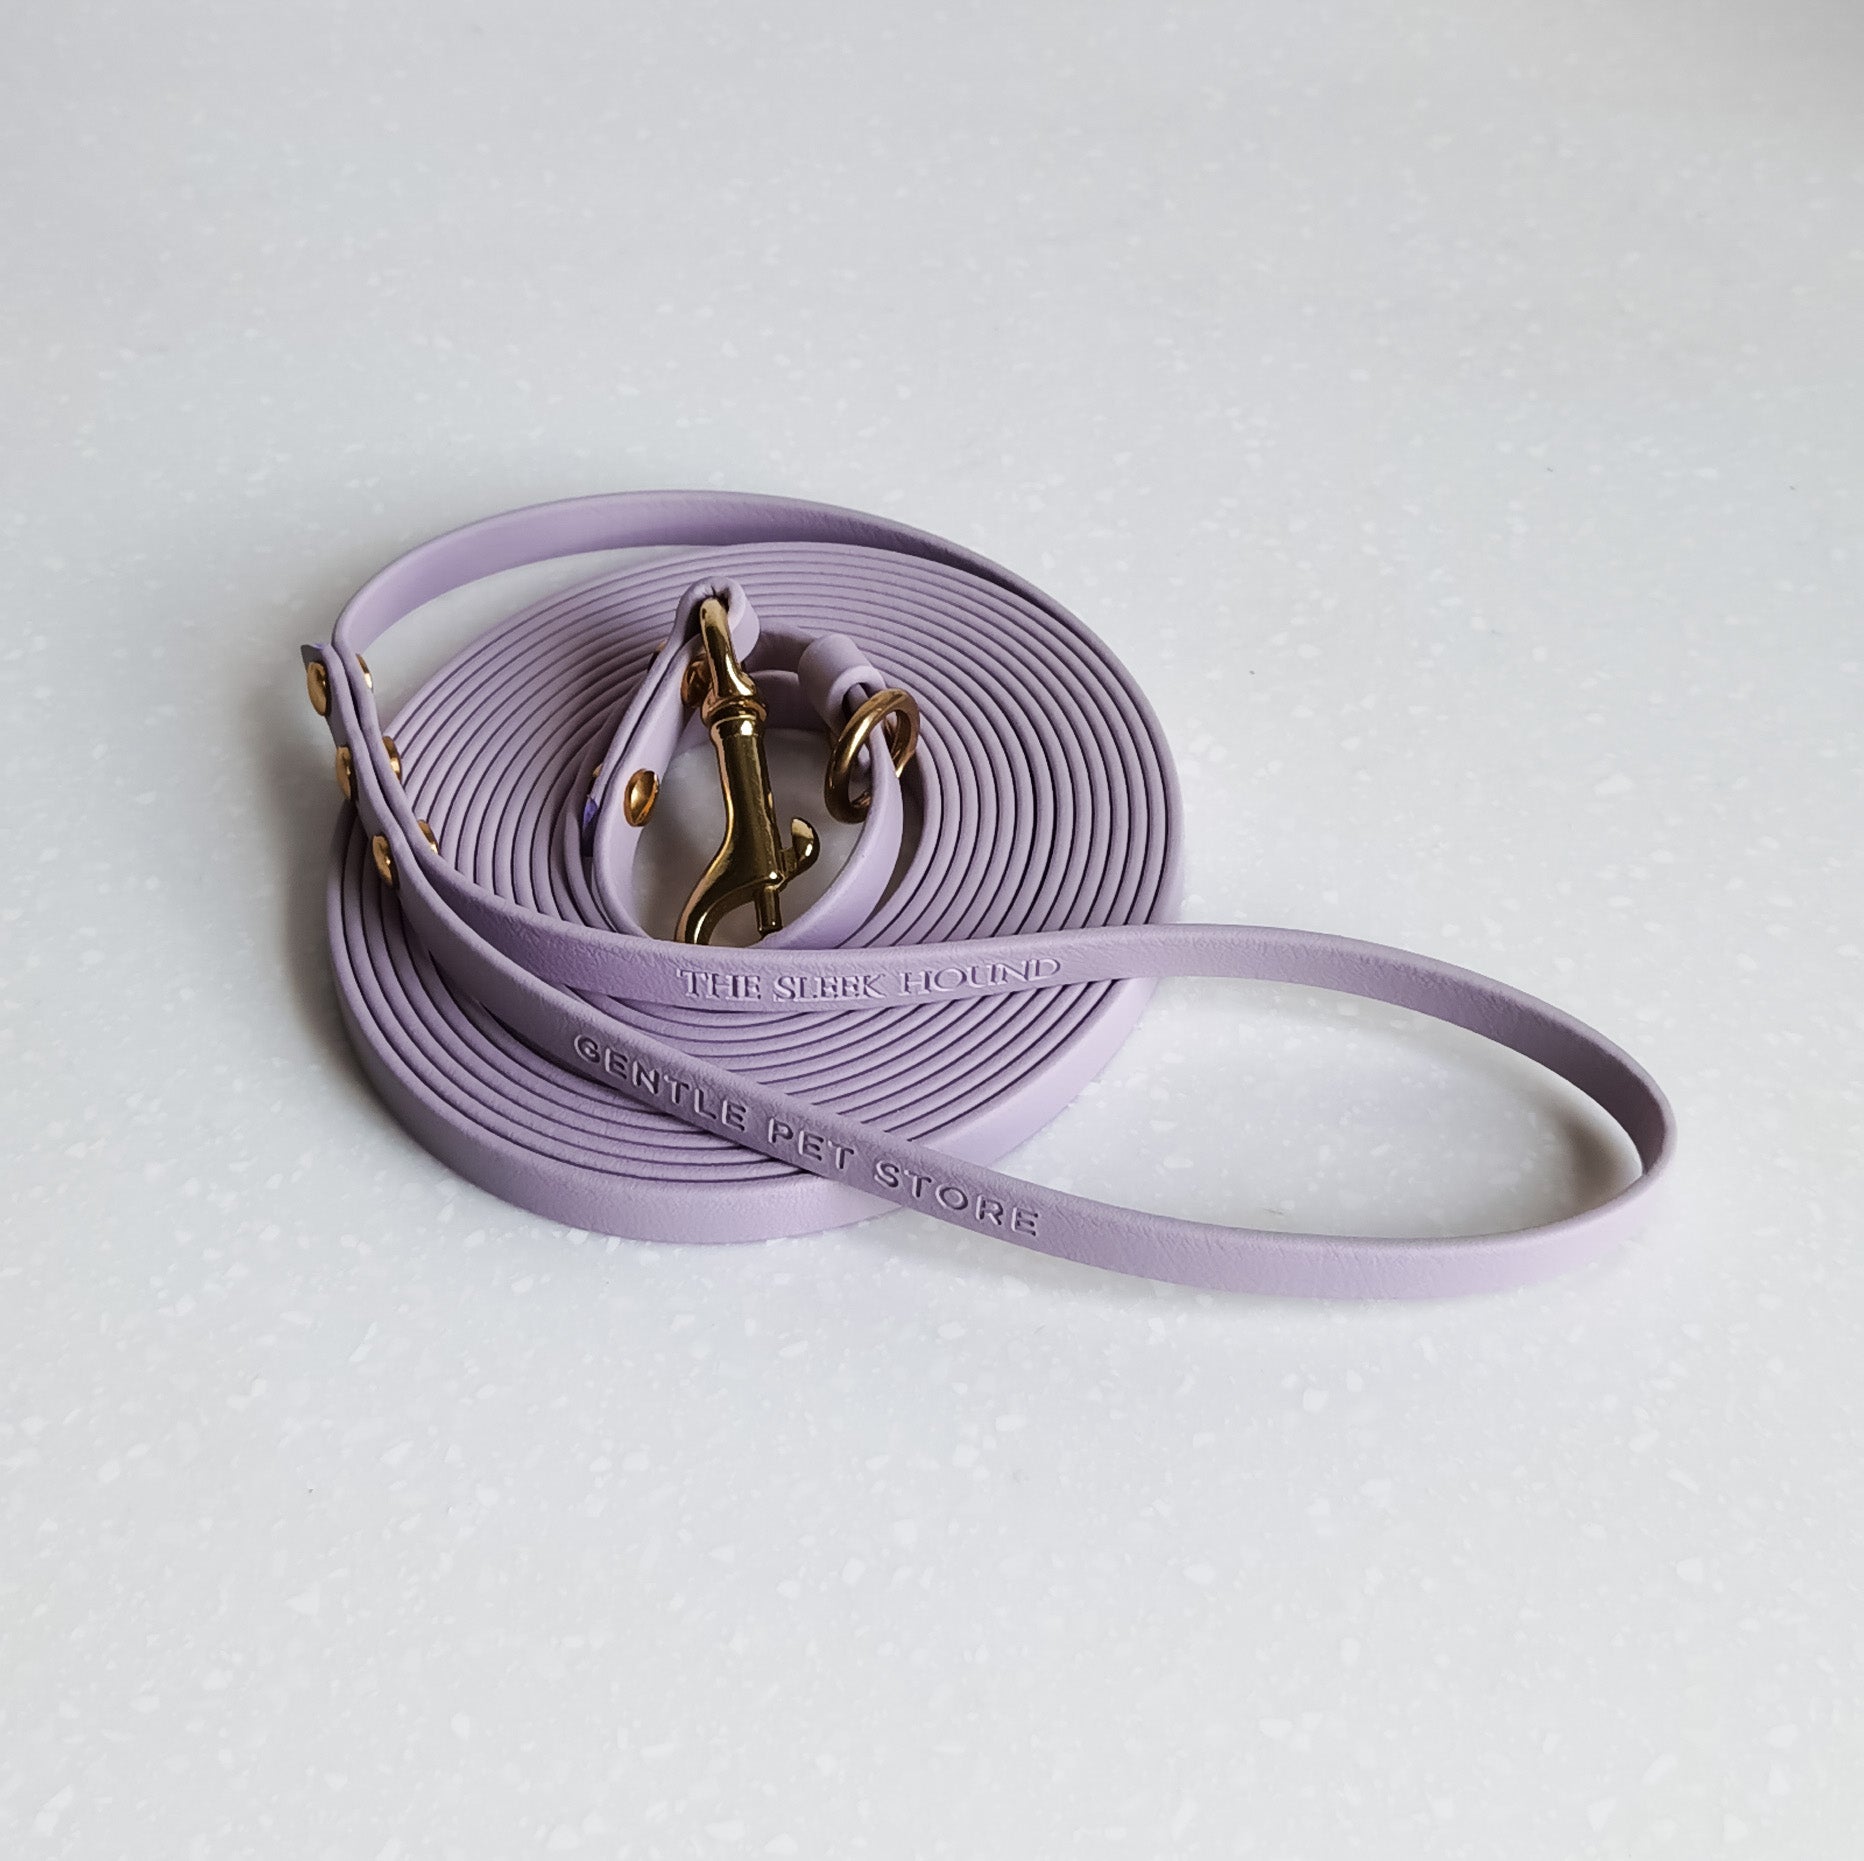 [LIMITED ED] The Sleek Hound x Gentle Pet Store Training Leash - Lilac